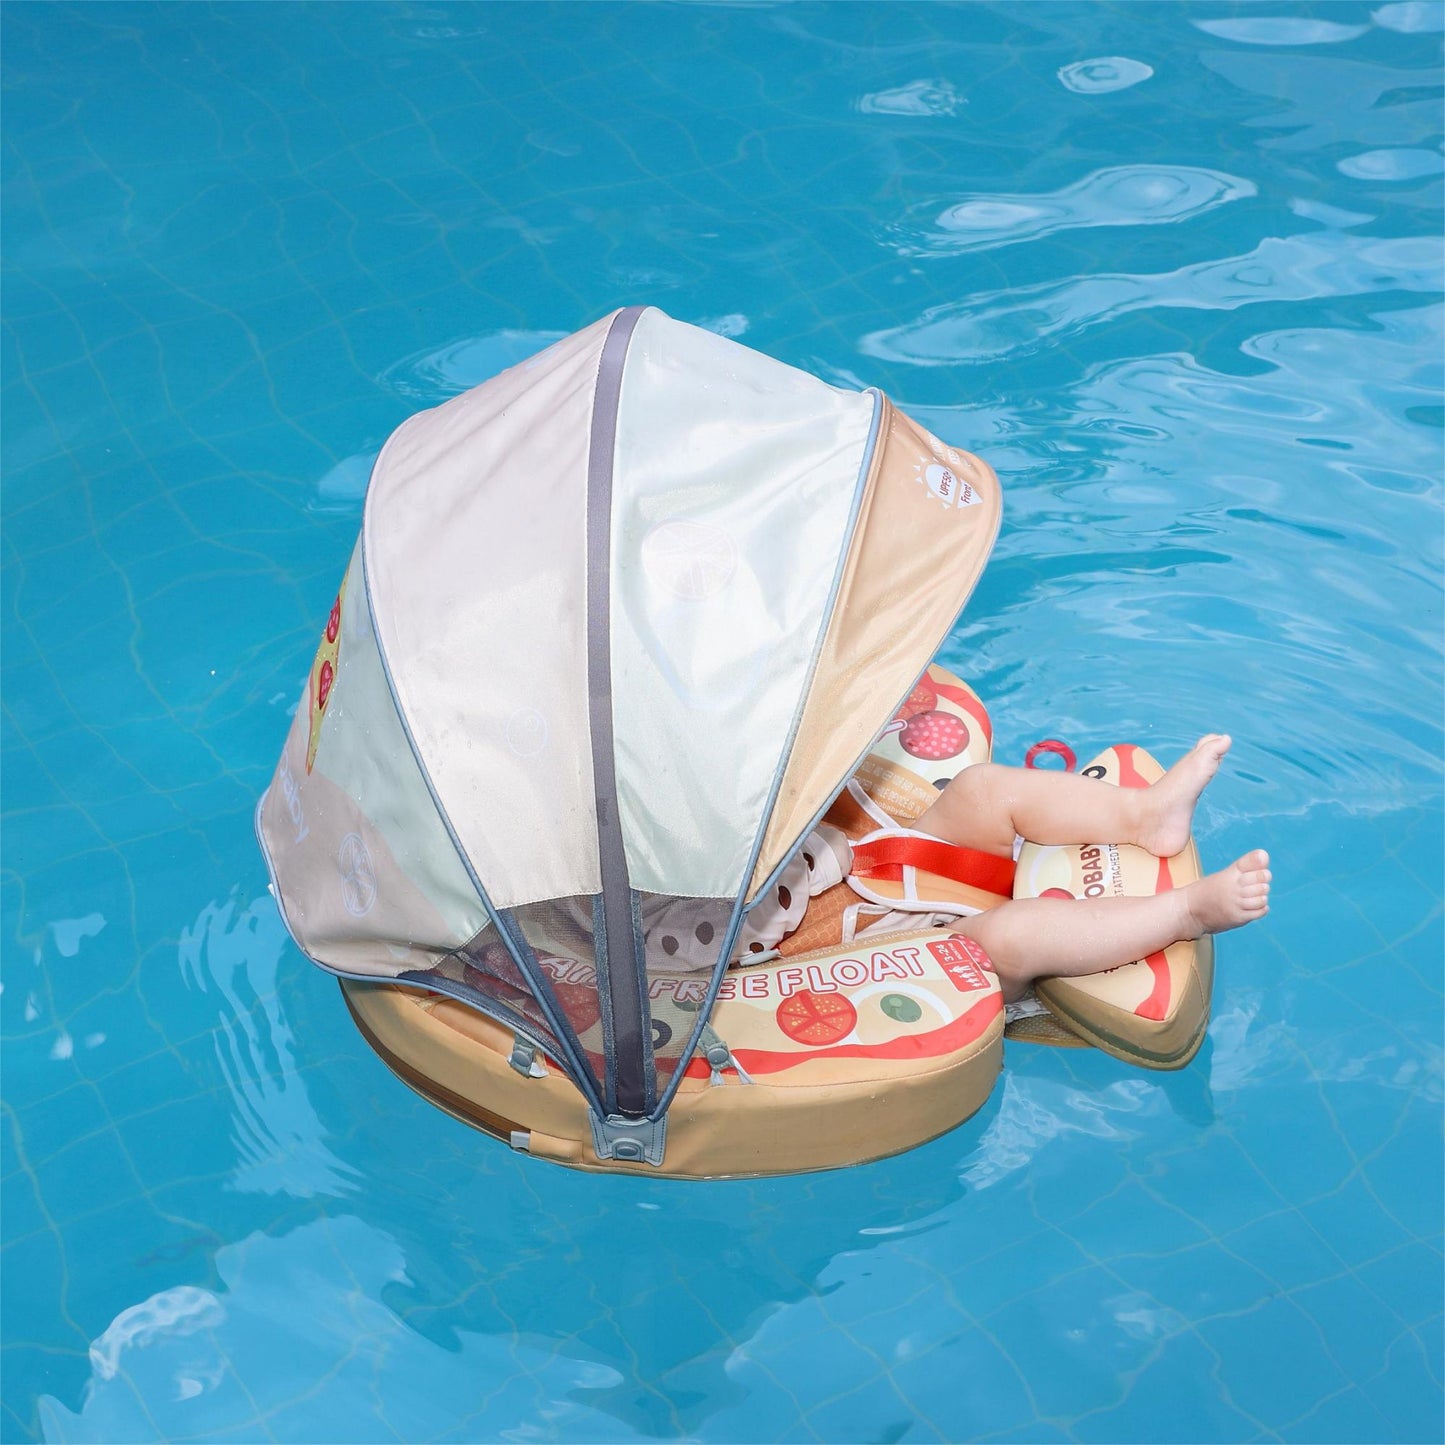 Mambobaby Swim Float with Canopy for Infants Pizza